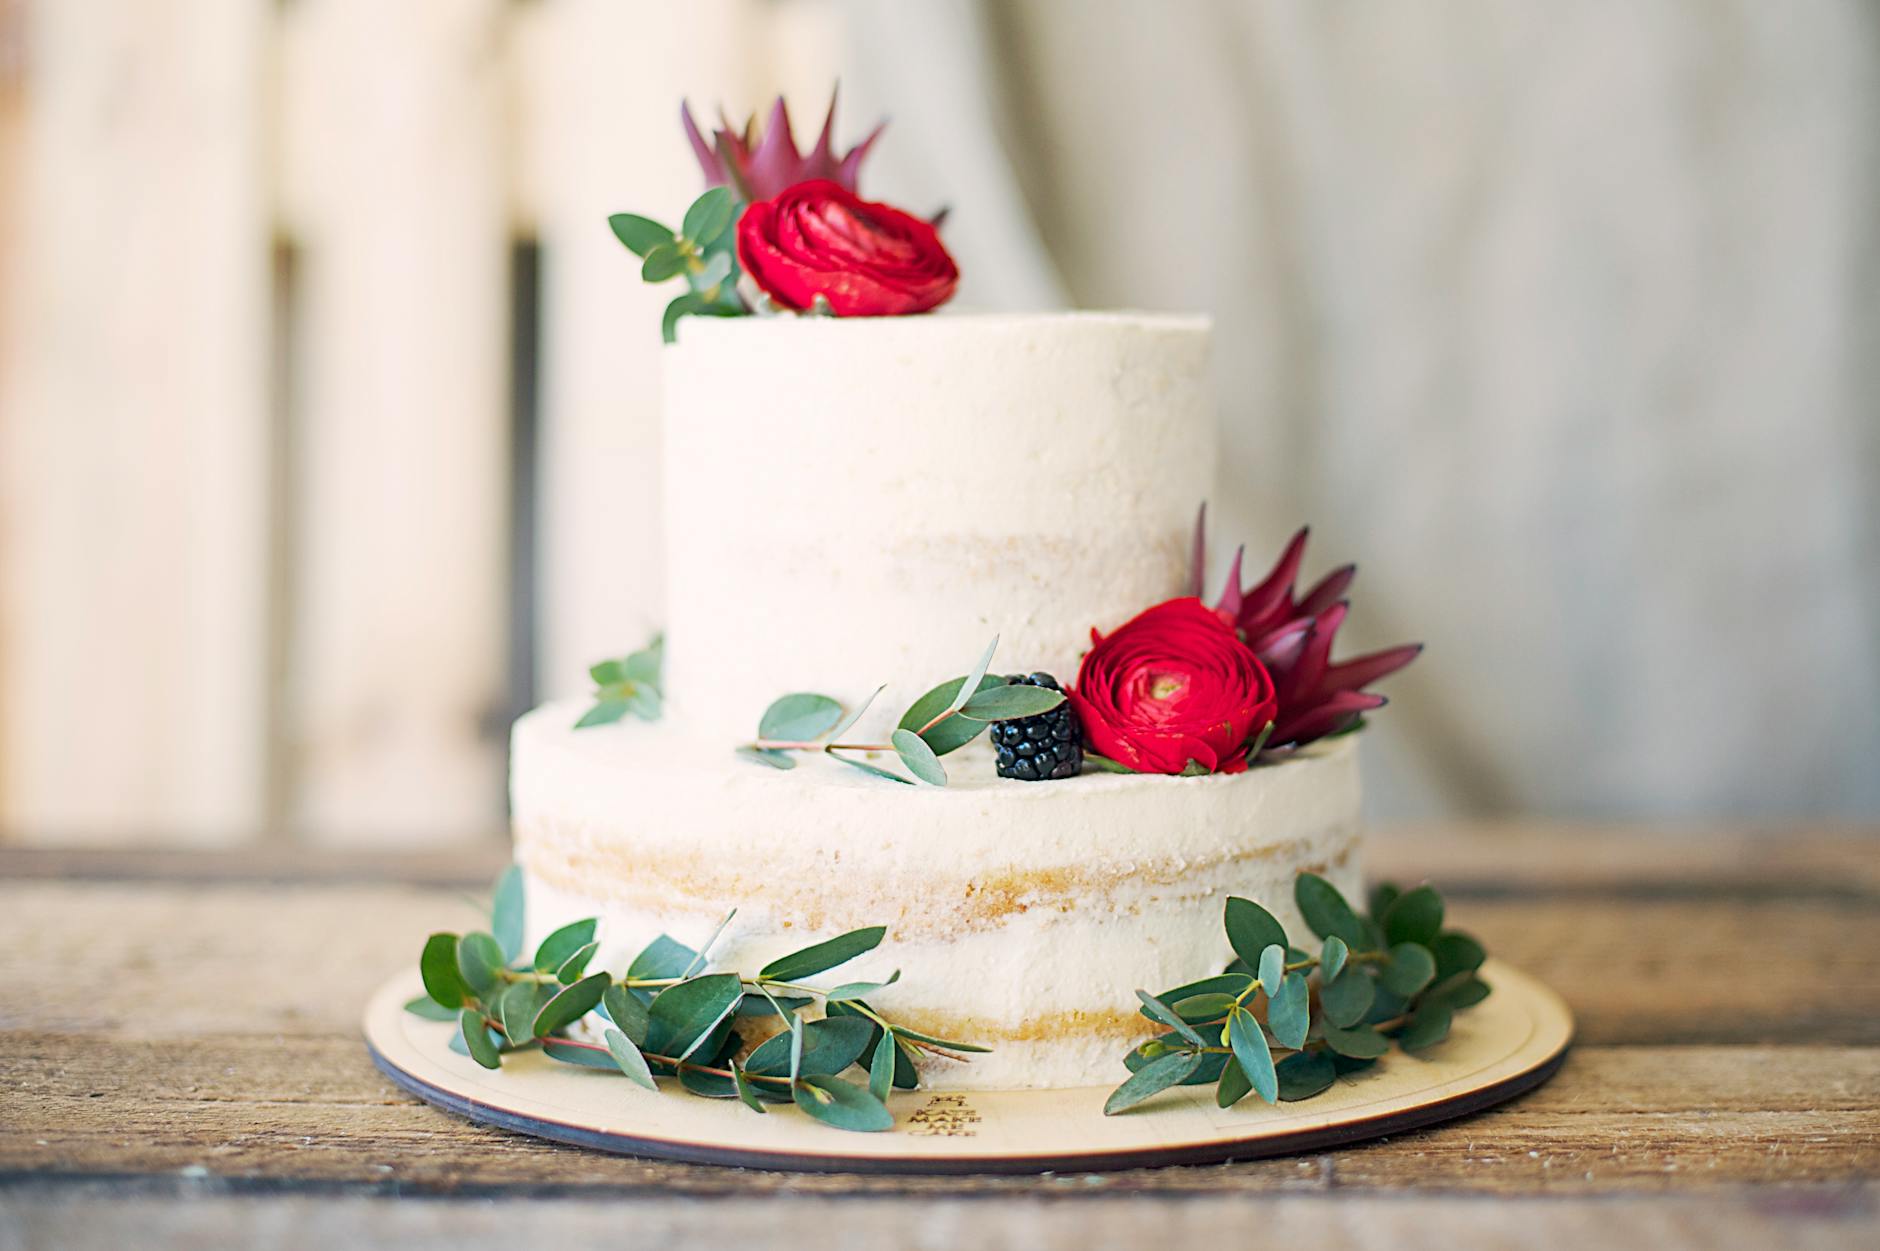 Some of the fantastic wedding cake trends for your most special day are: